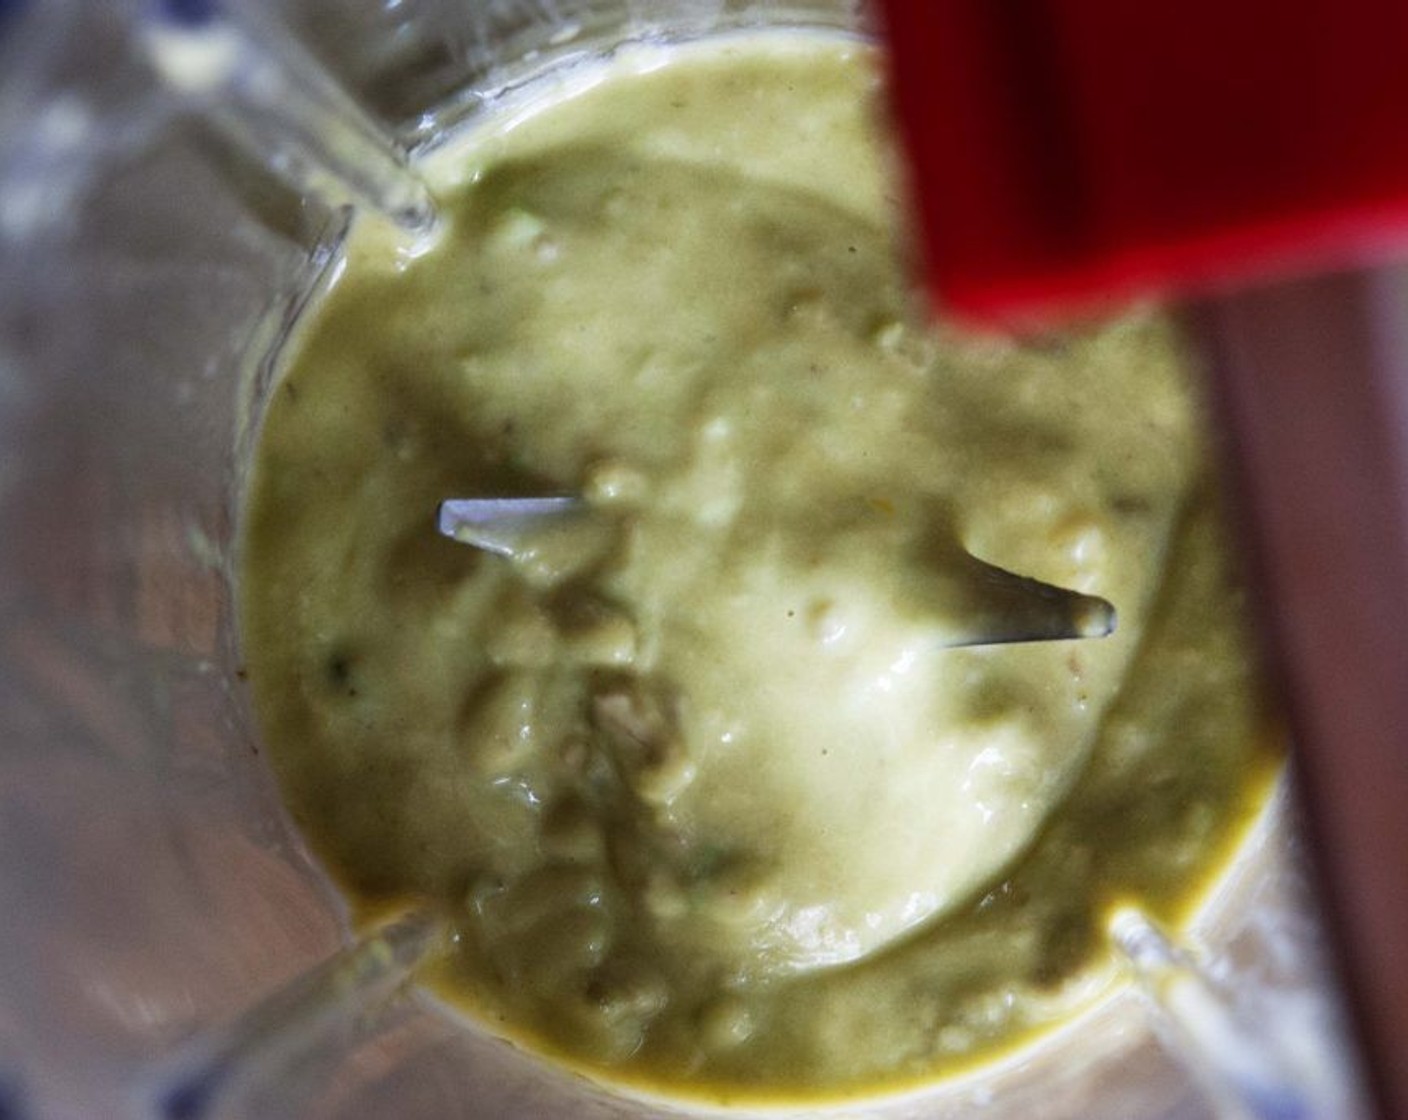 step 3 In a blender, puree Avocado (2/3 cup) with juice from the zested lemon and the Organic Egg (1).